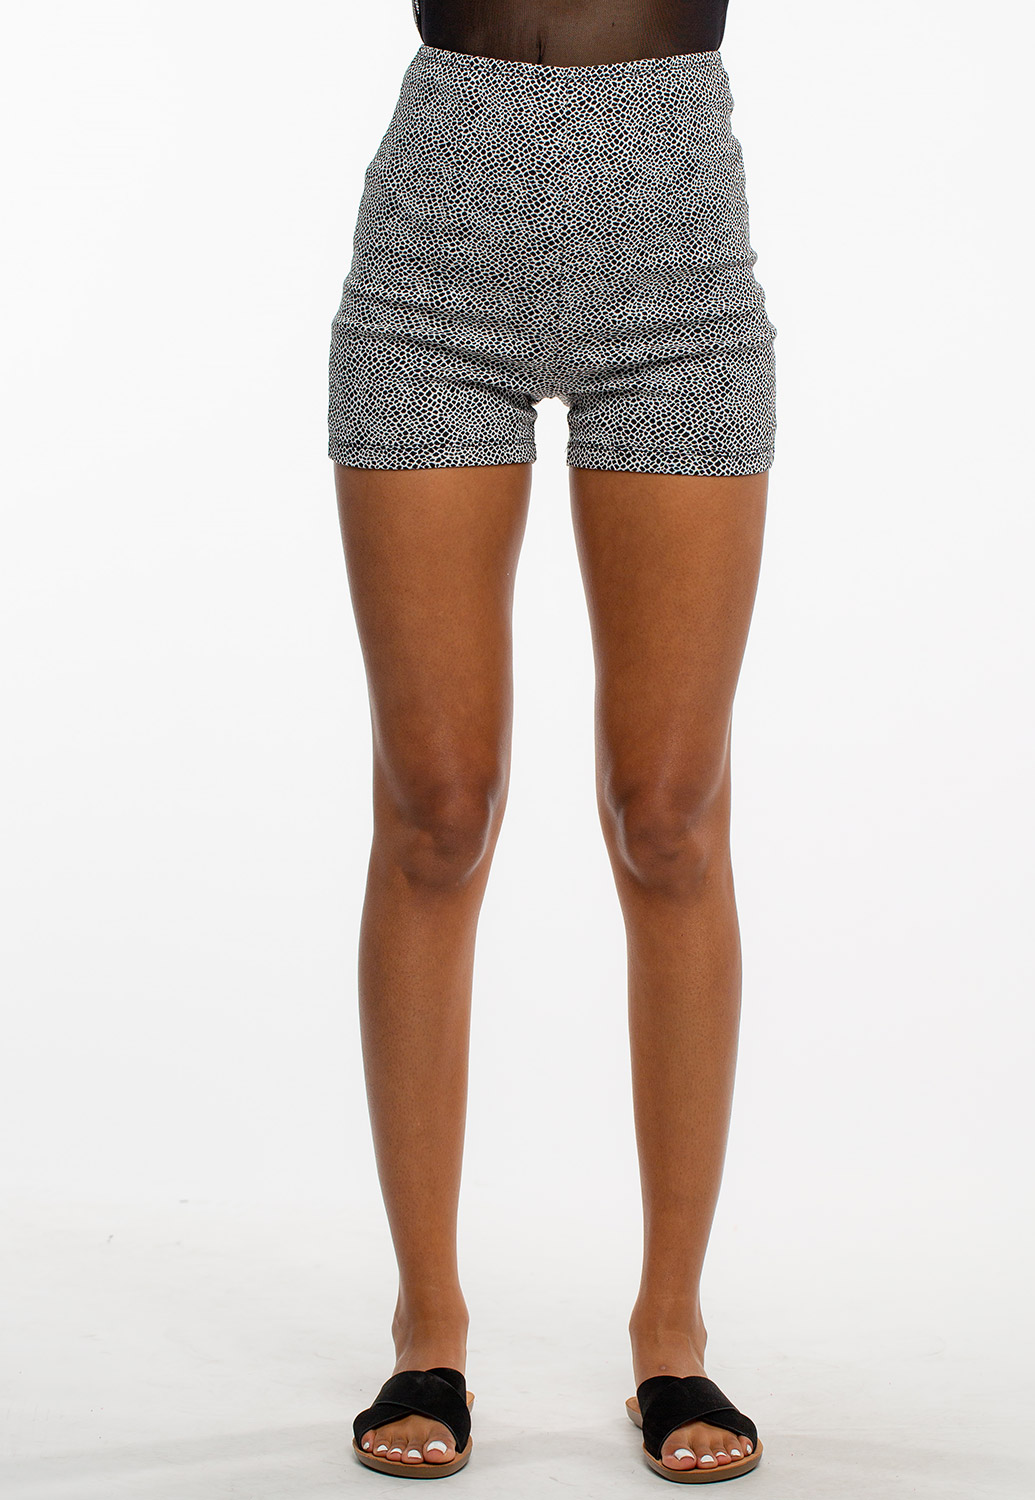 High-Waisted Stretchy Pattern Shorts 